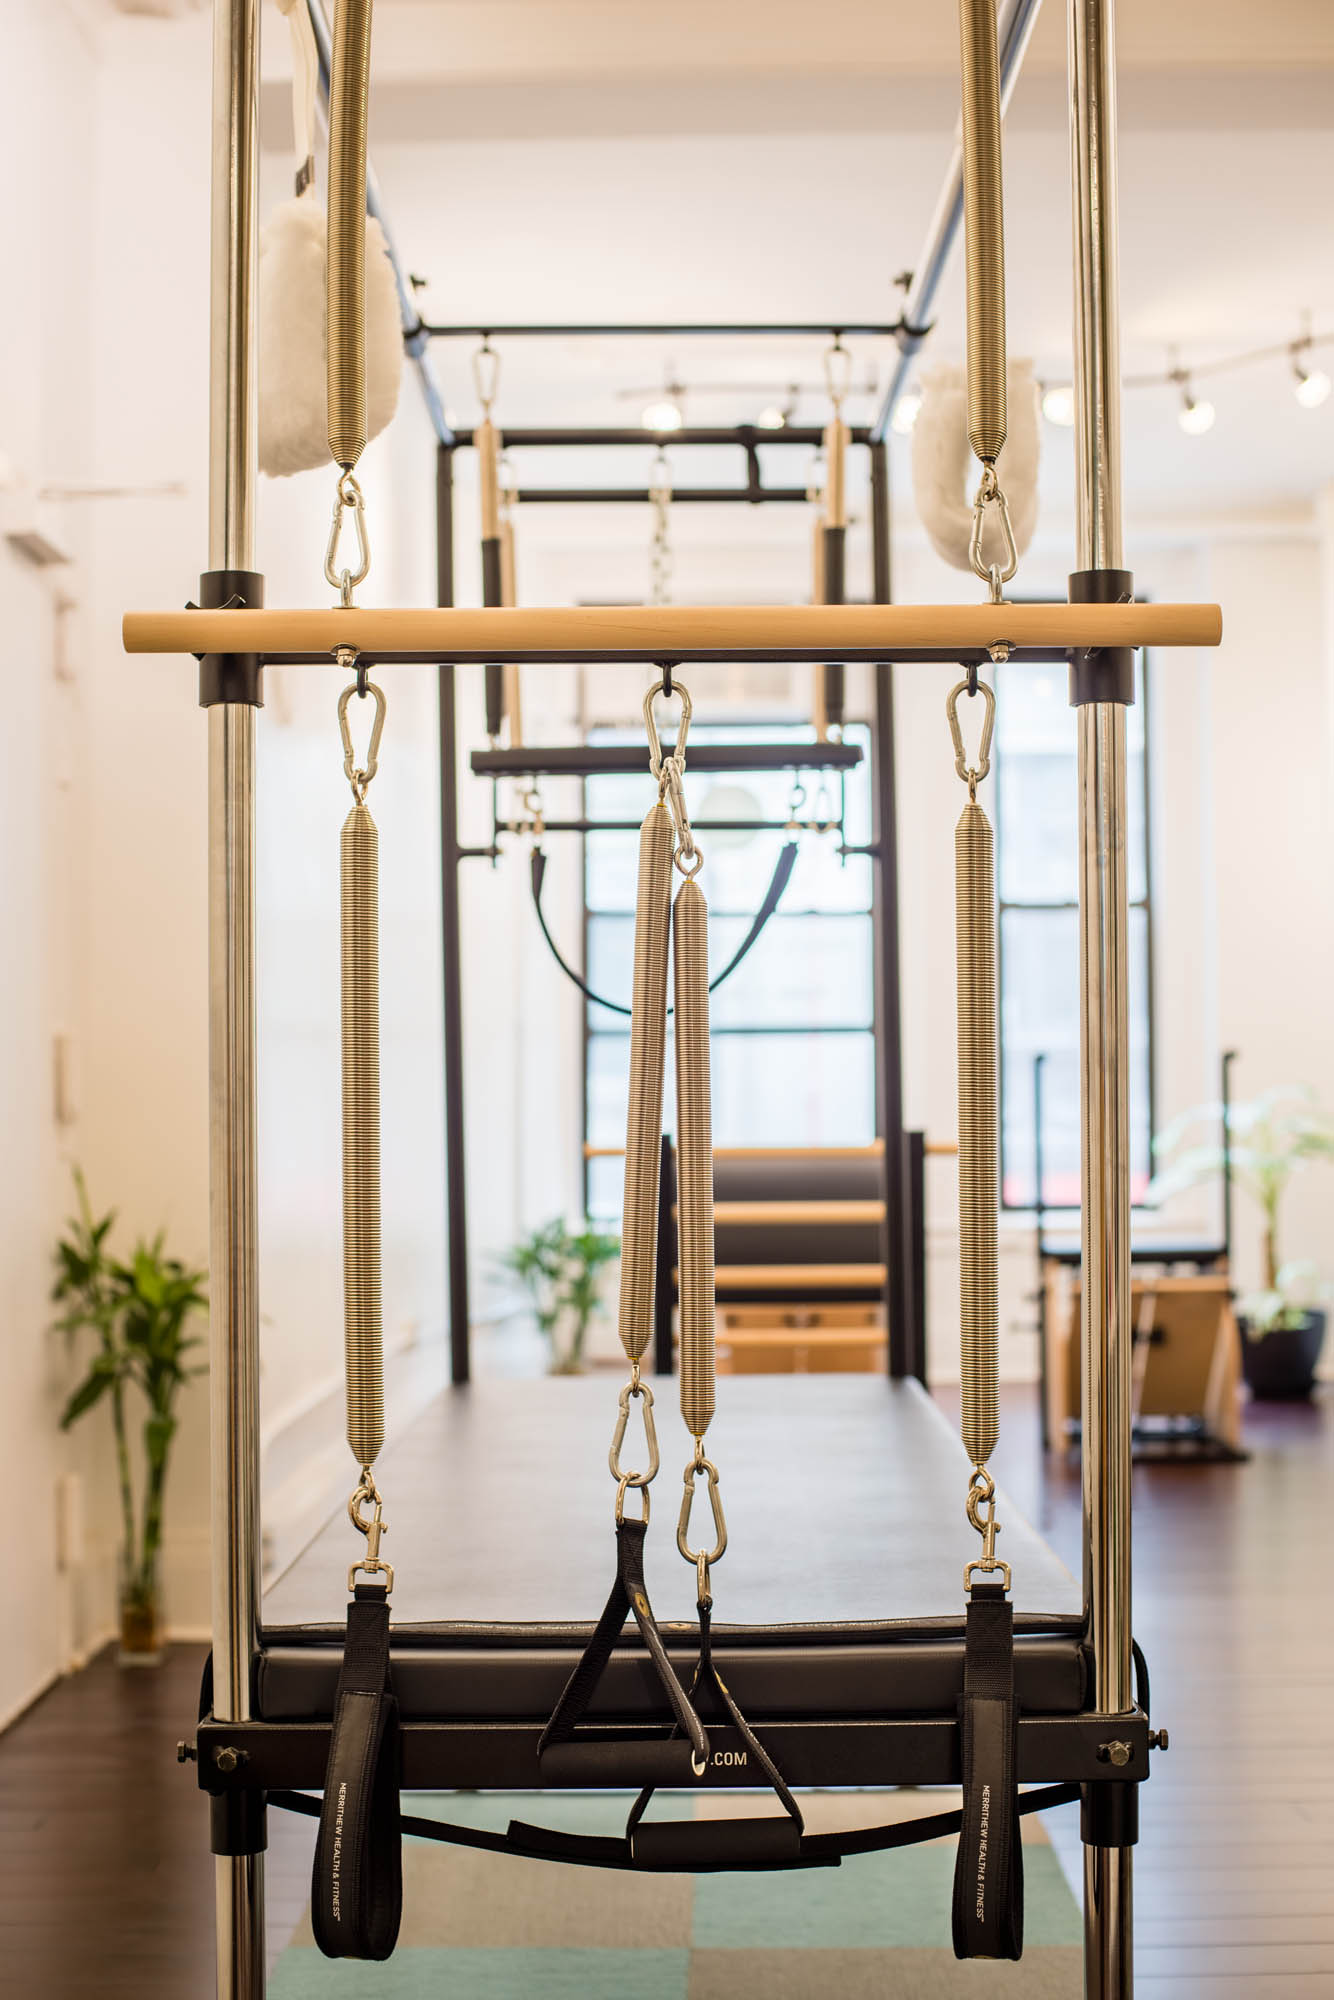 return to life center - pilates and functional movement - 7.jpg